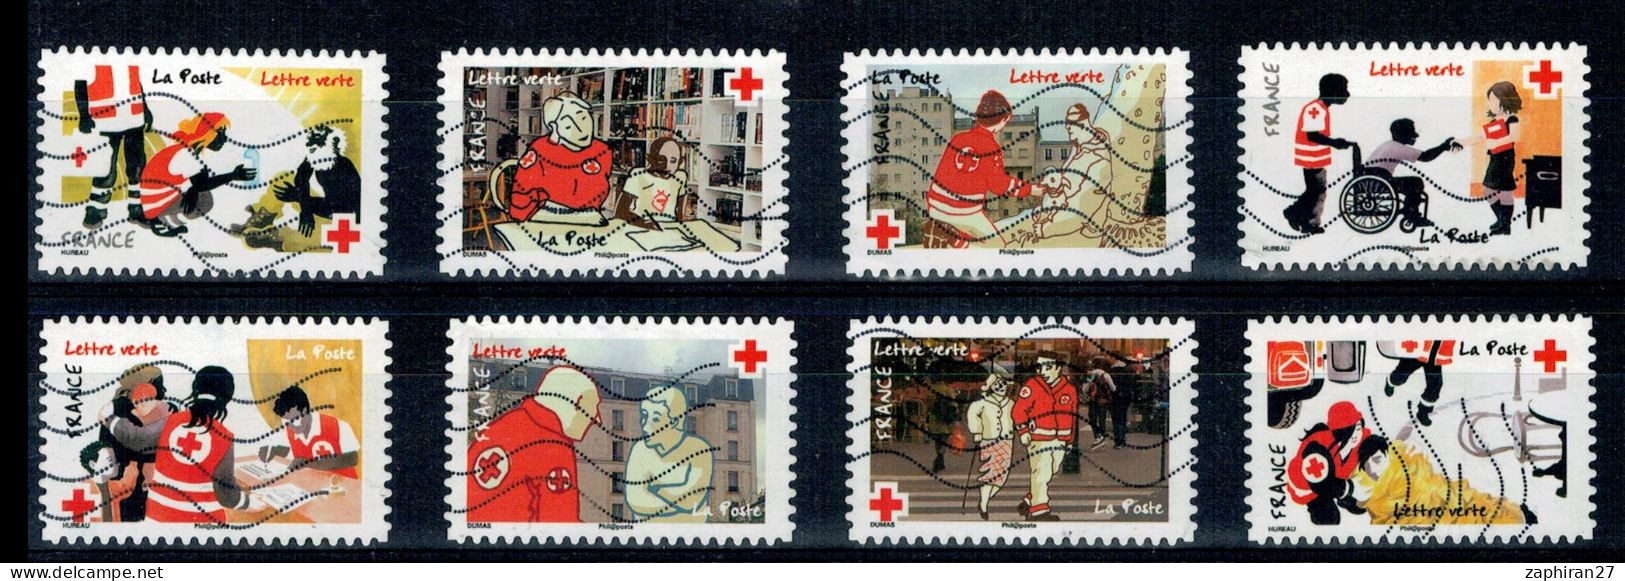 2016 N 1270 A 1277 SERIE CROIX ROUGE EN ACTION OBLITEREE COMPLETE - Used Stamps